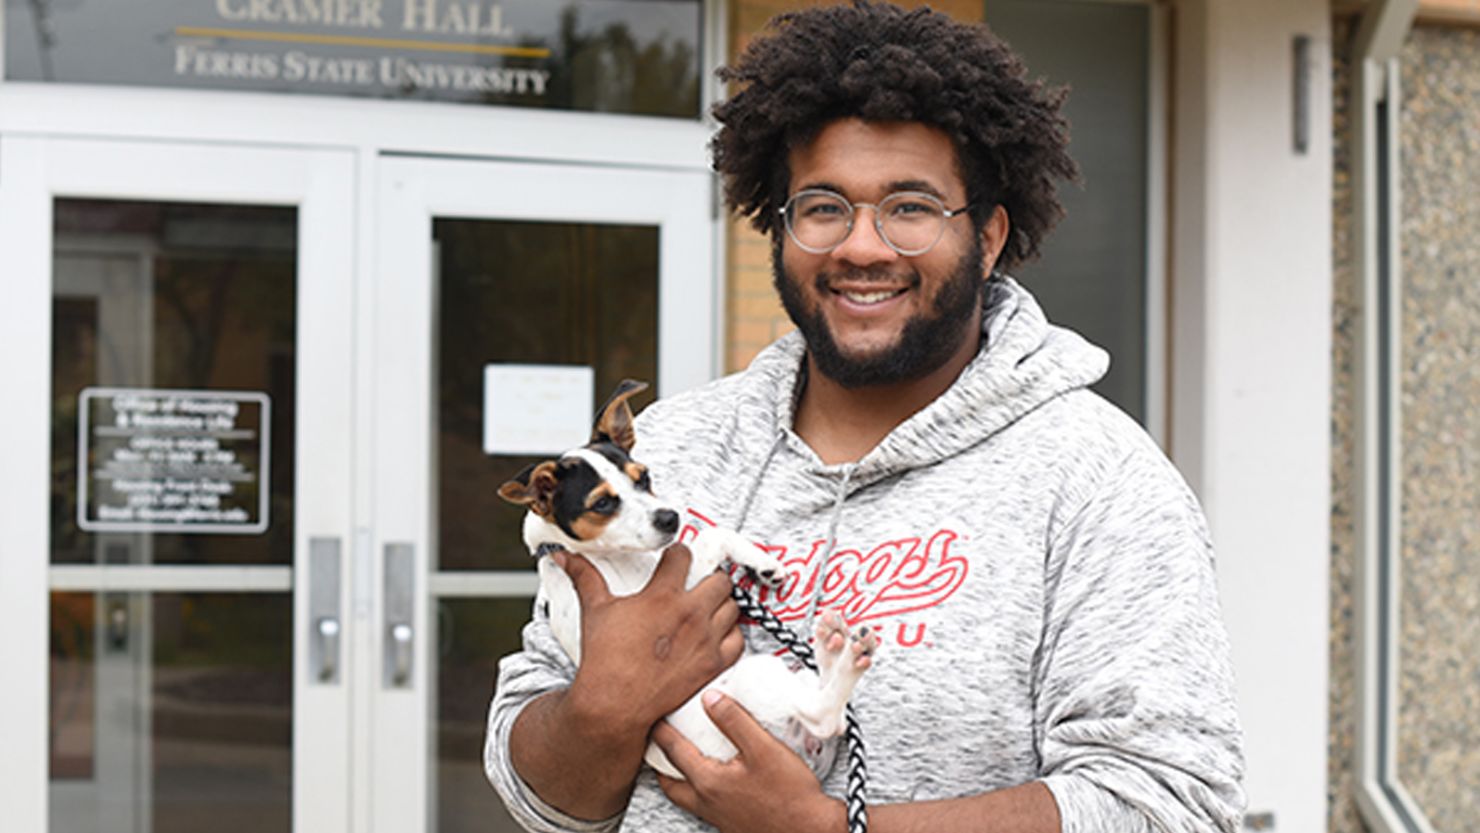 Ferris State University student Alando Steele, holding his puppy Emi, is all smiles about a new pet-friendly floor in Cramer Hall.